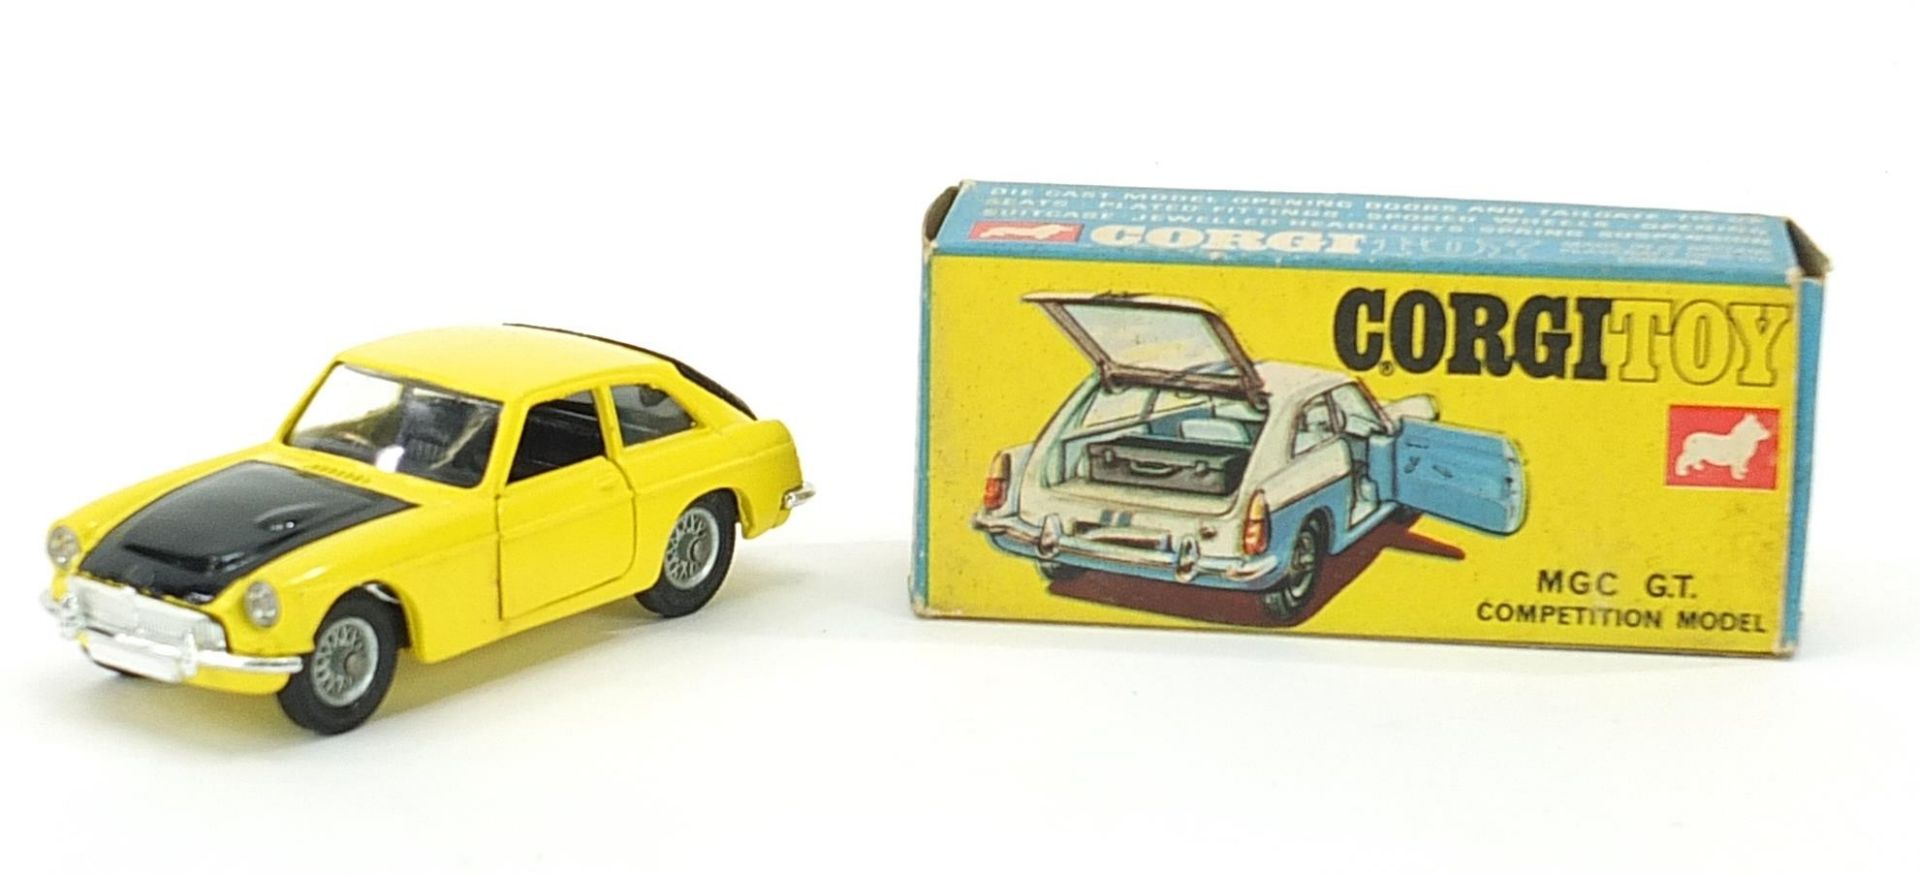 Corgi diecast competition model MGC GT with box